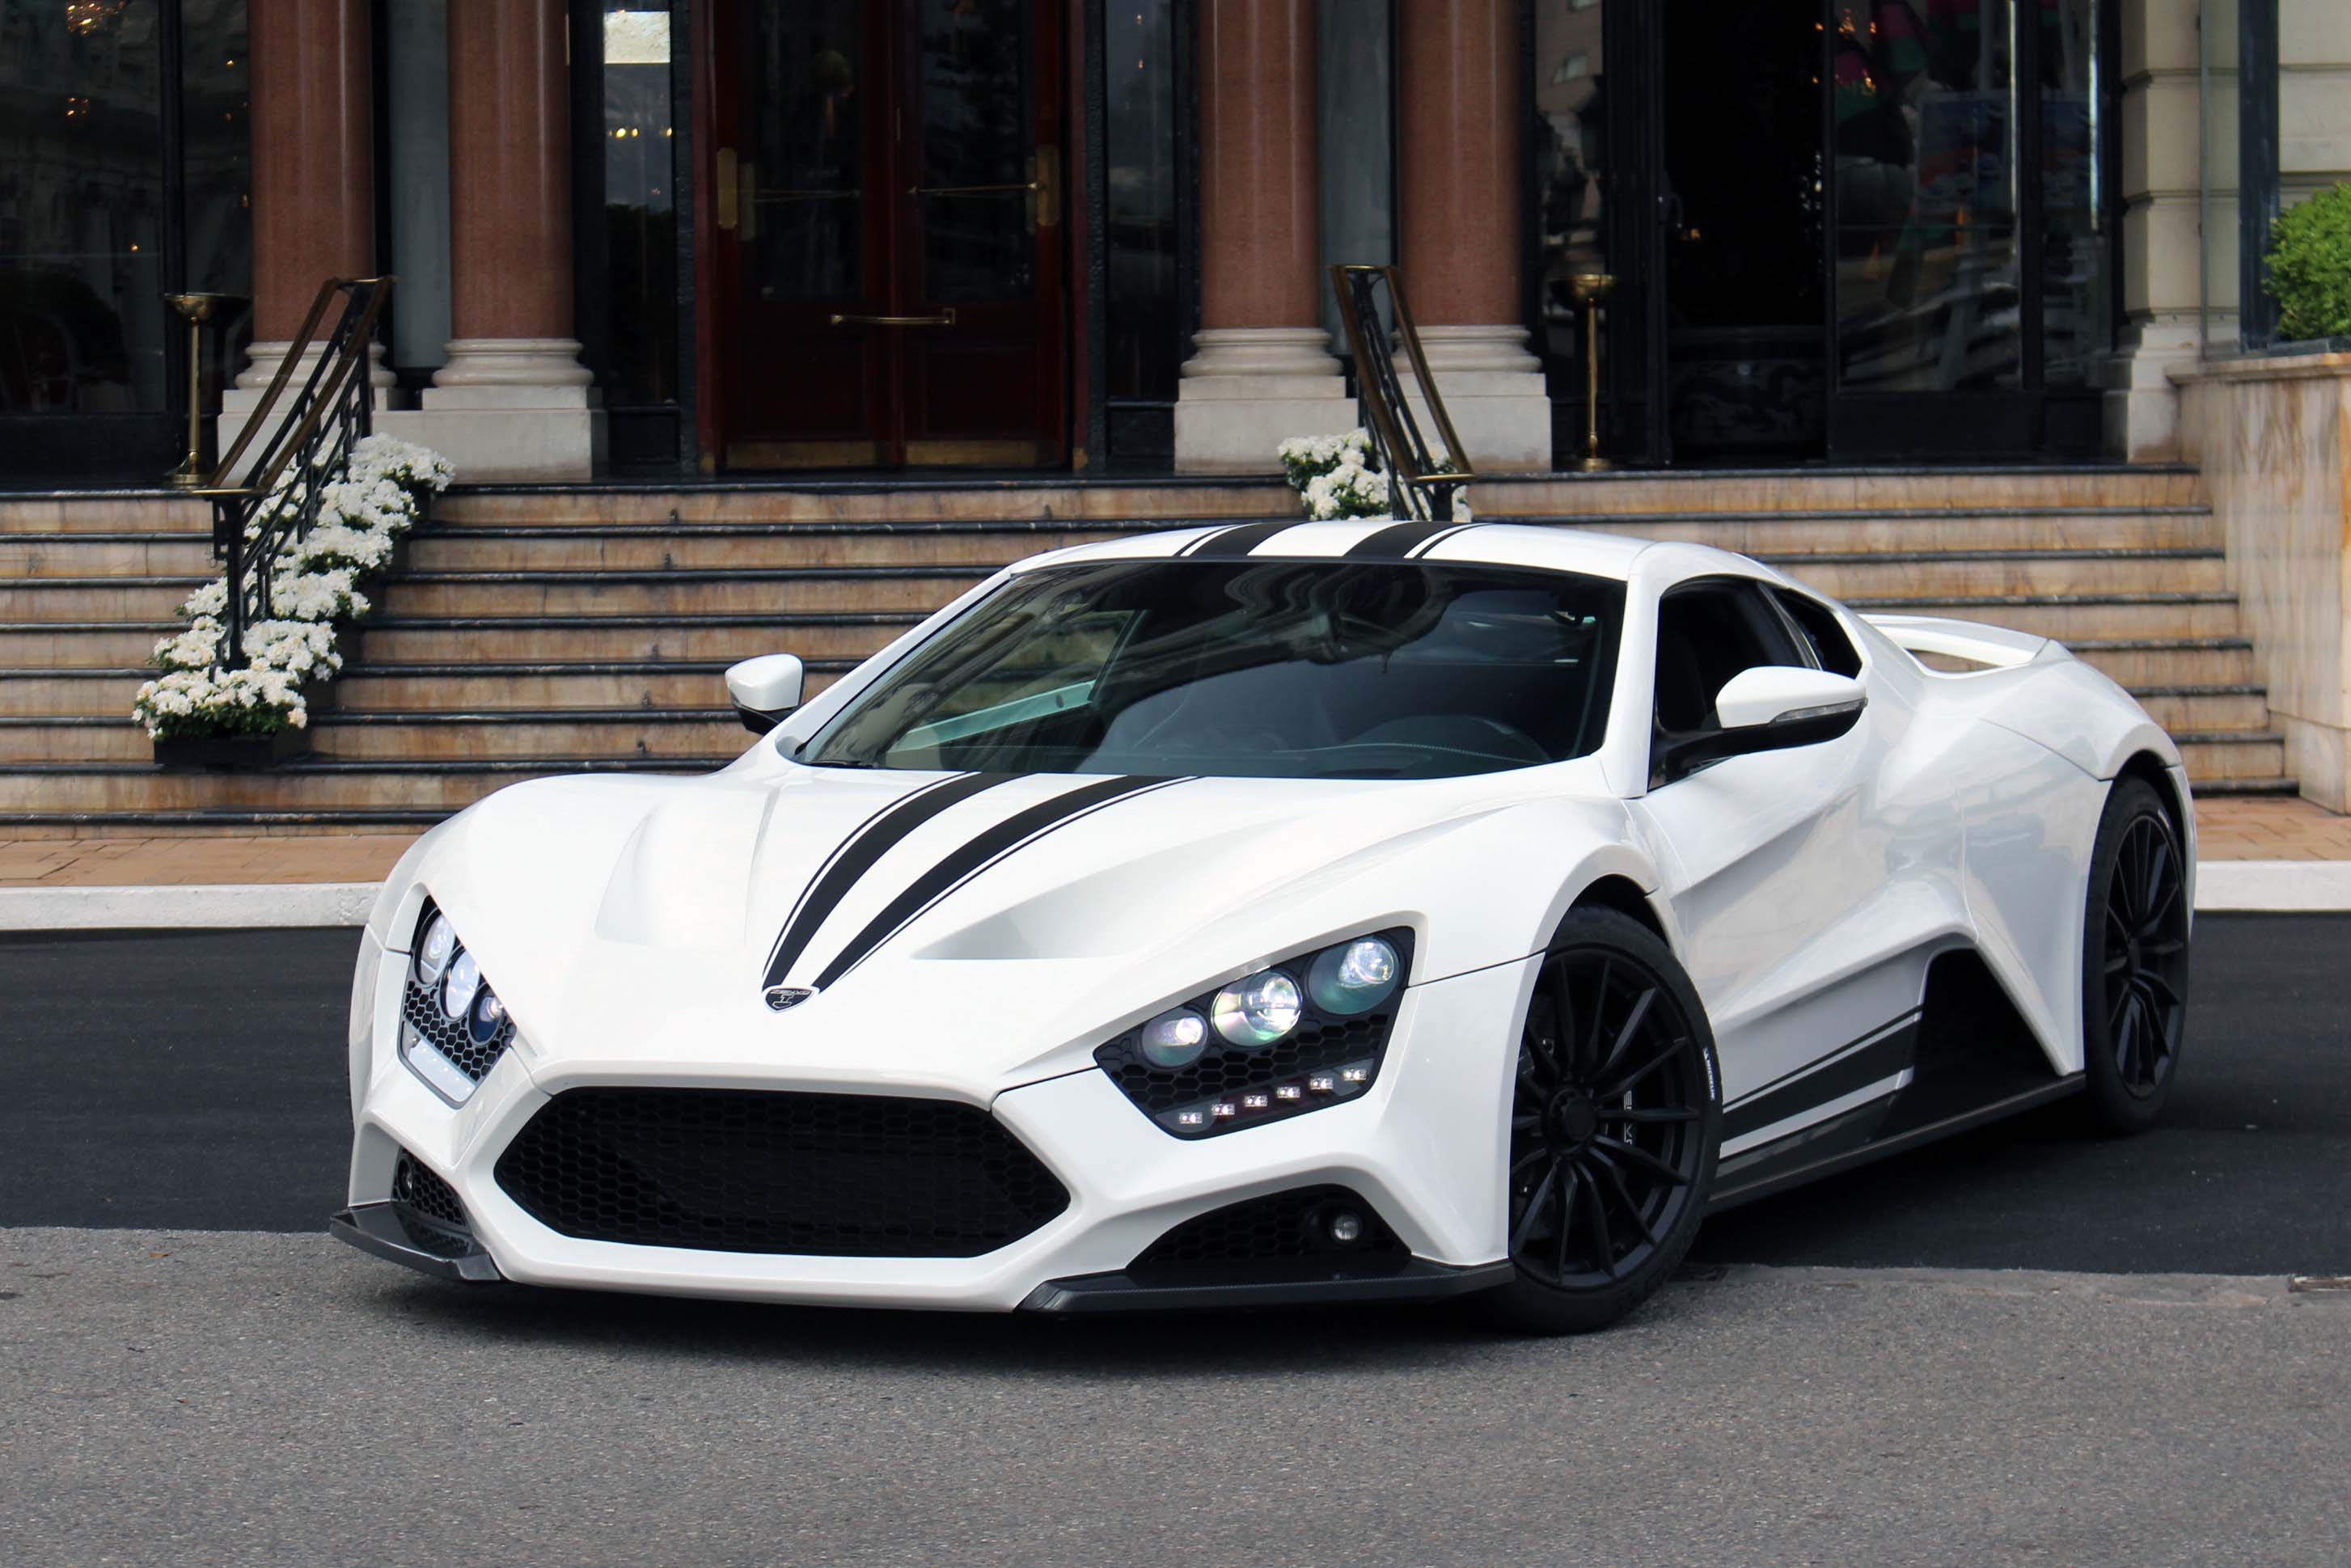 Zenvo St1 Wallpapers Images Photos Pictures Backgrounds